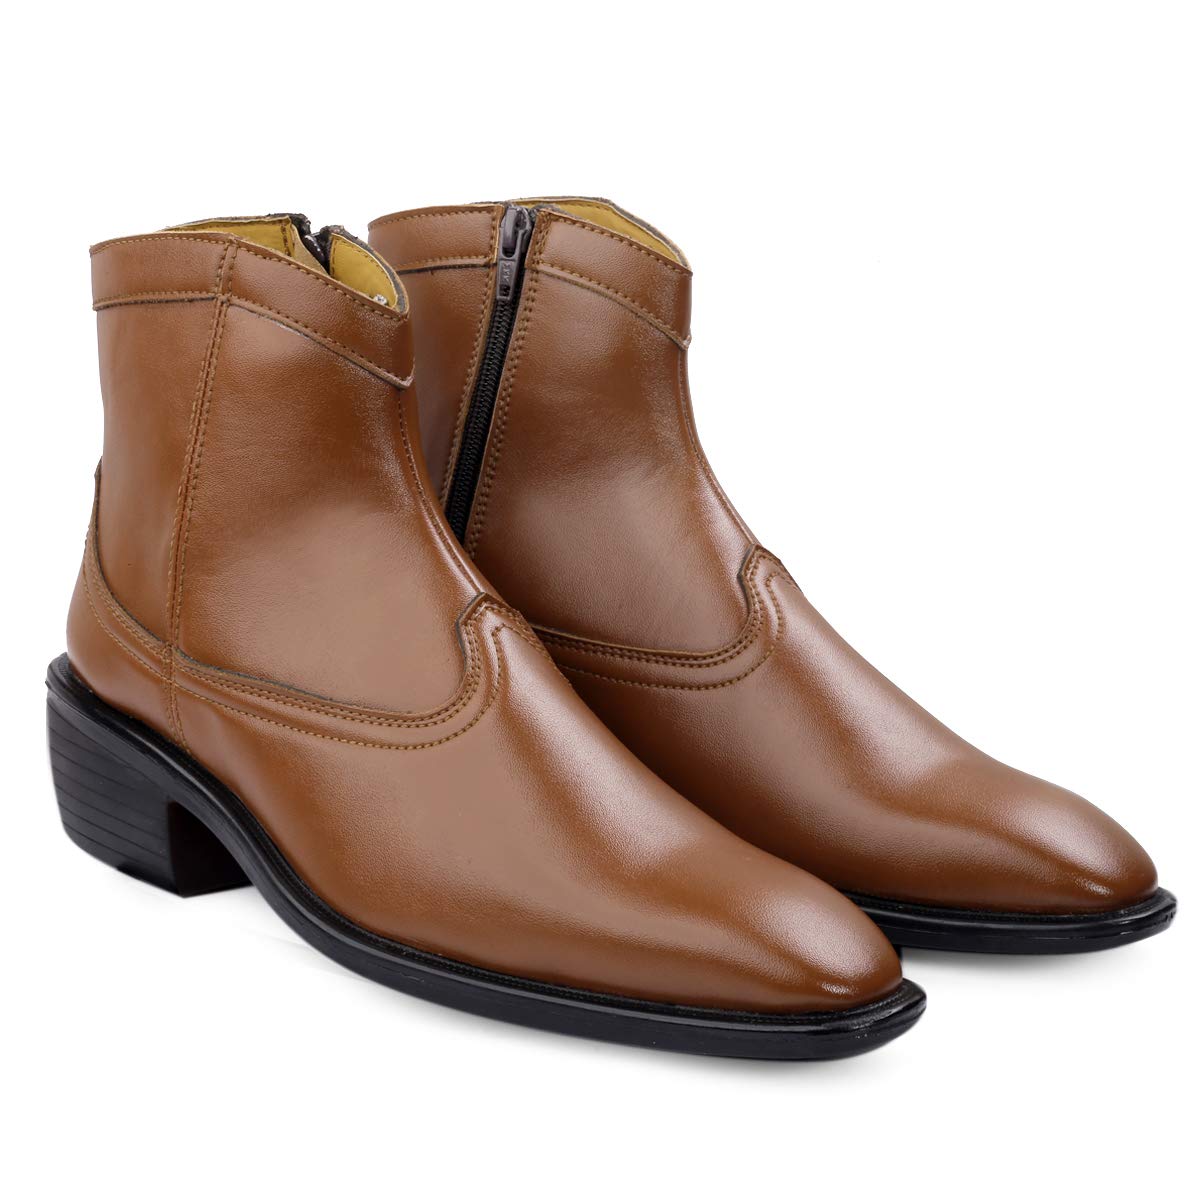 Classy High Ankle Tan Casual And Formal Boot With Zip Pattern-Unique and Classy